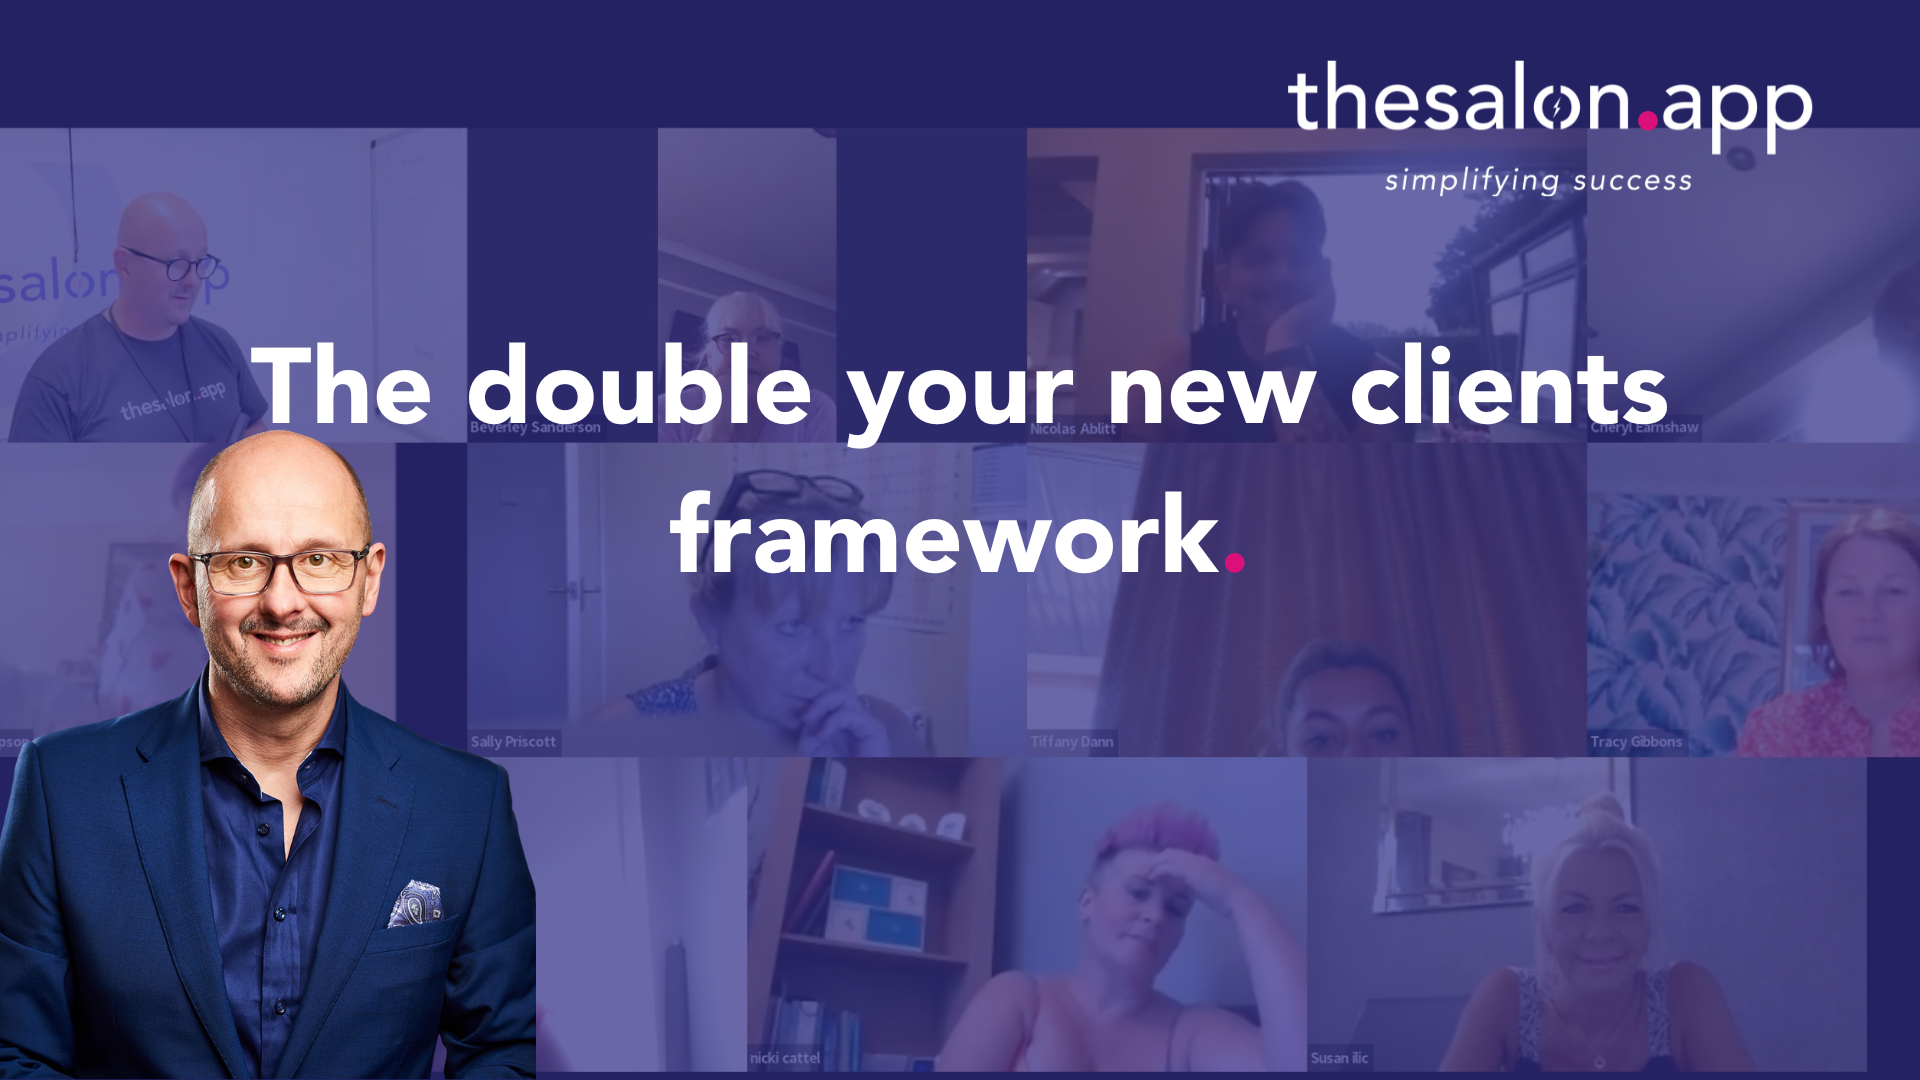 Colin Shove introducing the double new clients framework